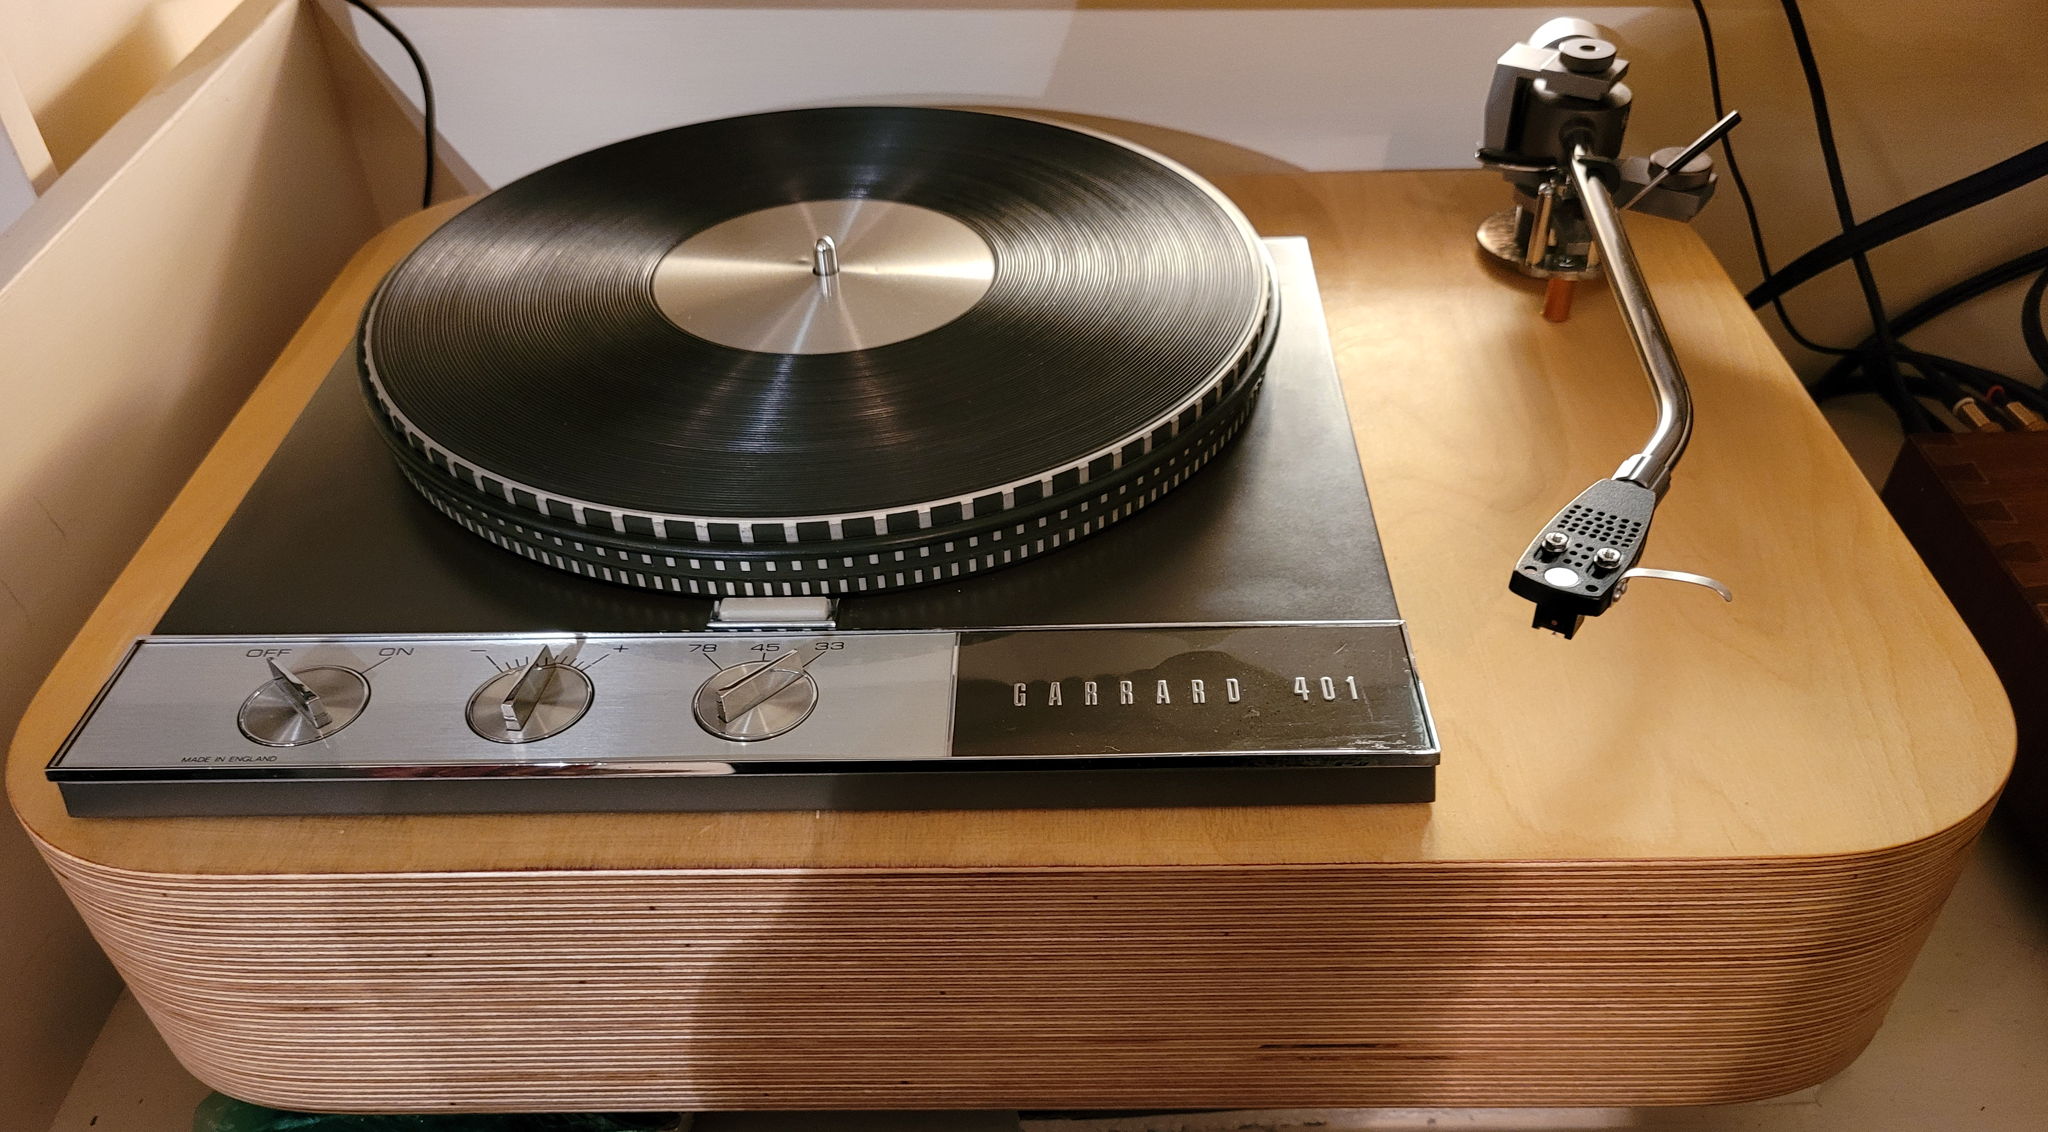 Garrard 401 with Jelco 750L arm